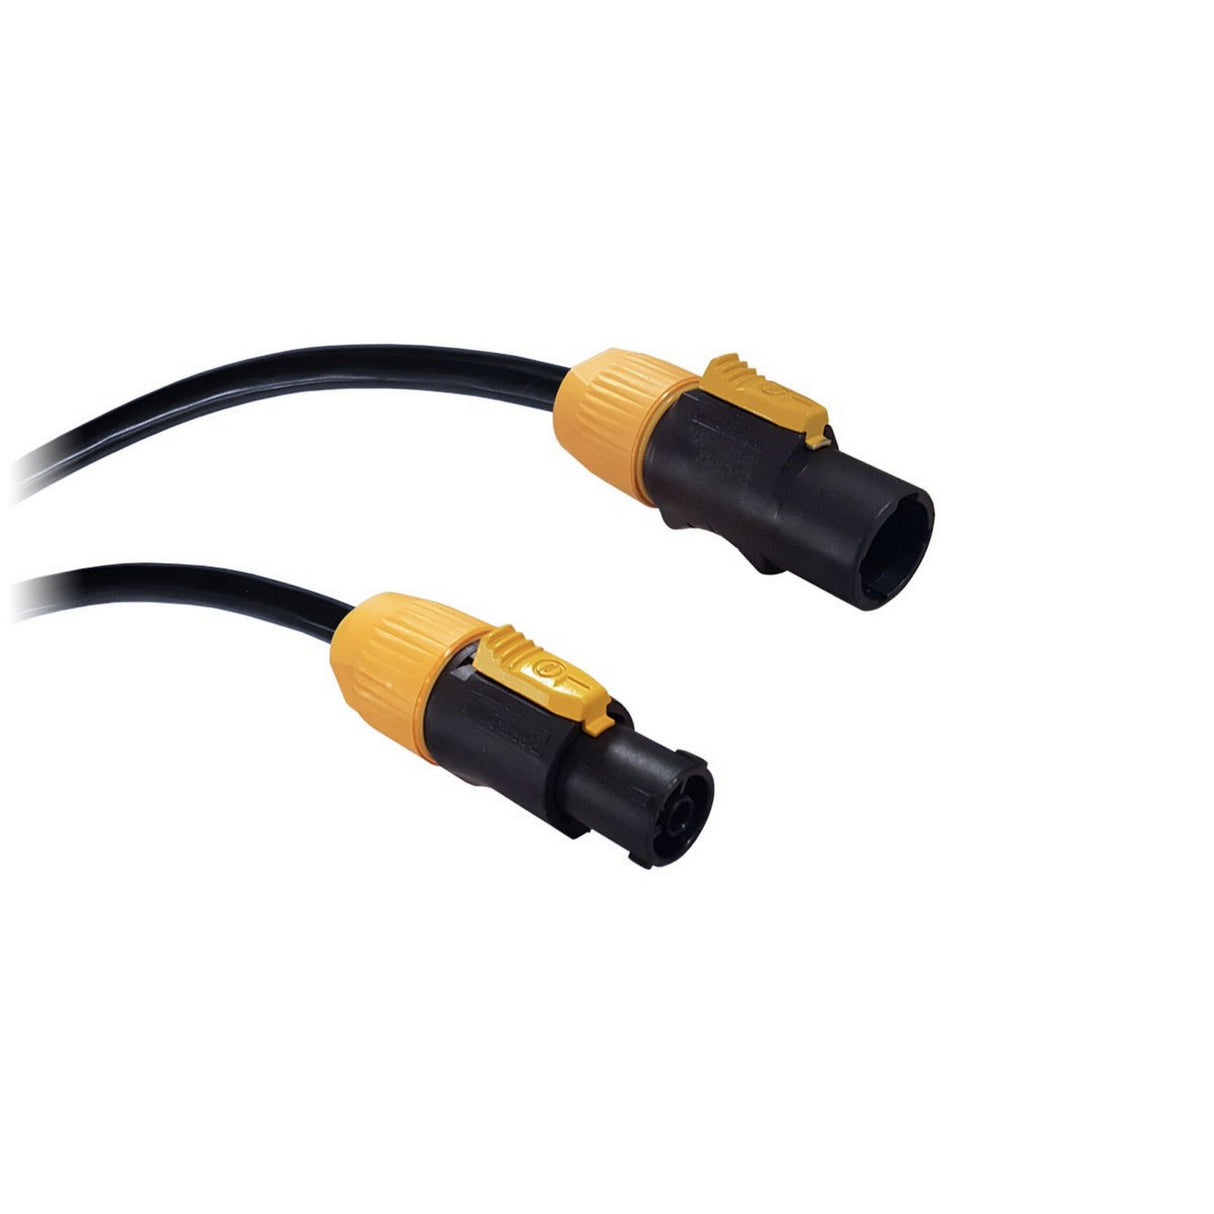 Blizzard Lighting PCT-INTER-1403 powerCON TRUE1 Compatible Male to Female Interconnect Cable, 3 Foot